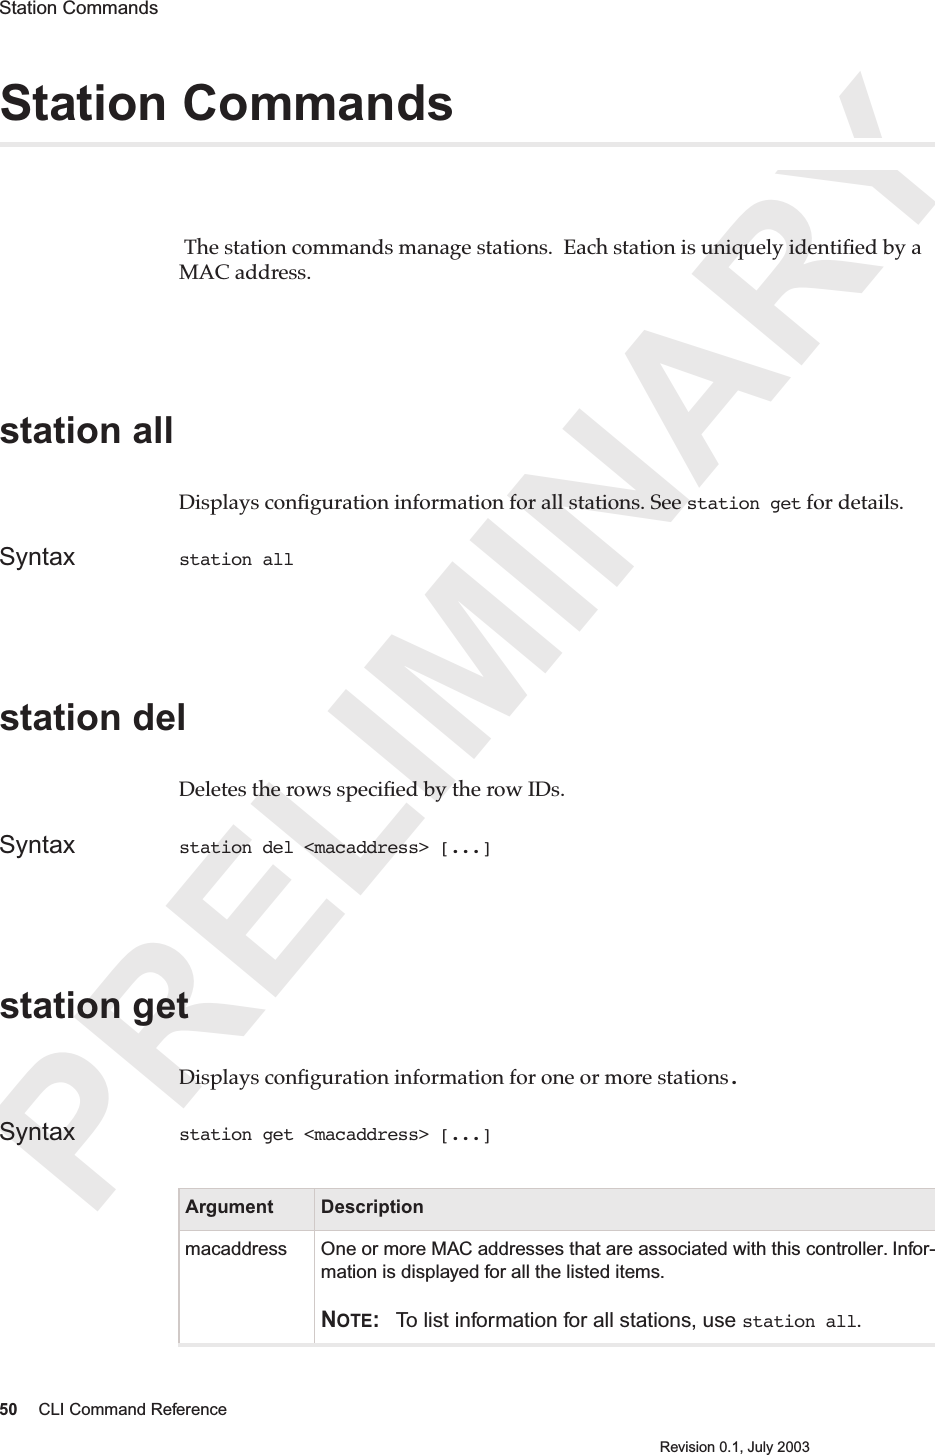 PRELIMINARY50 CLI Command ReferenceRevision 0.1, July 2003Station Commands Station Commands The station commands manage stations.  Each station is uniquely identiﬁed by a MAC address.station all Displays conﬁguration information for all stations. See station get for details.Syntax station all station delDeletes the rows speciﬁed by the row IDs.Syntax station del &lt;macaddress&gt; [...]station getDisplays conﬁguration information for one or more stations.Syntax station get &lt;macaddress&gt; [...]Argument Descriptionmacaddress One or more MAC addresses that are associated with this controller. Infor-mation is displayed for all the listed items.NOTE: To list information for all stations, use station all.